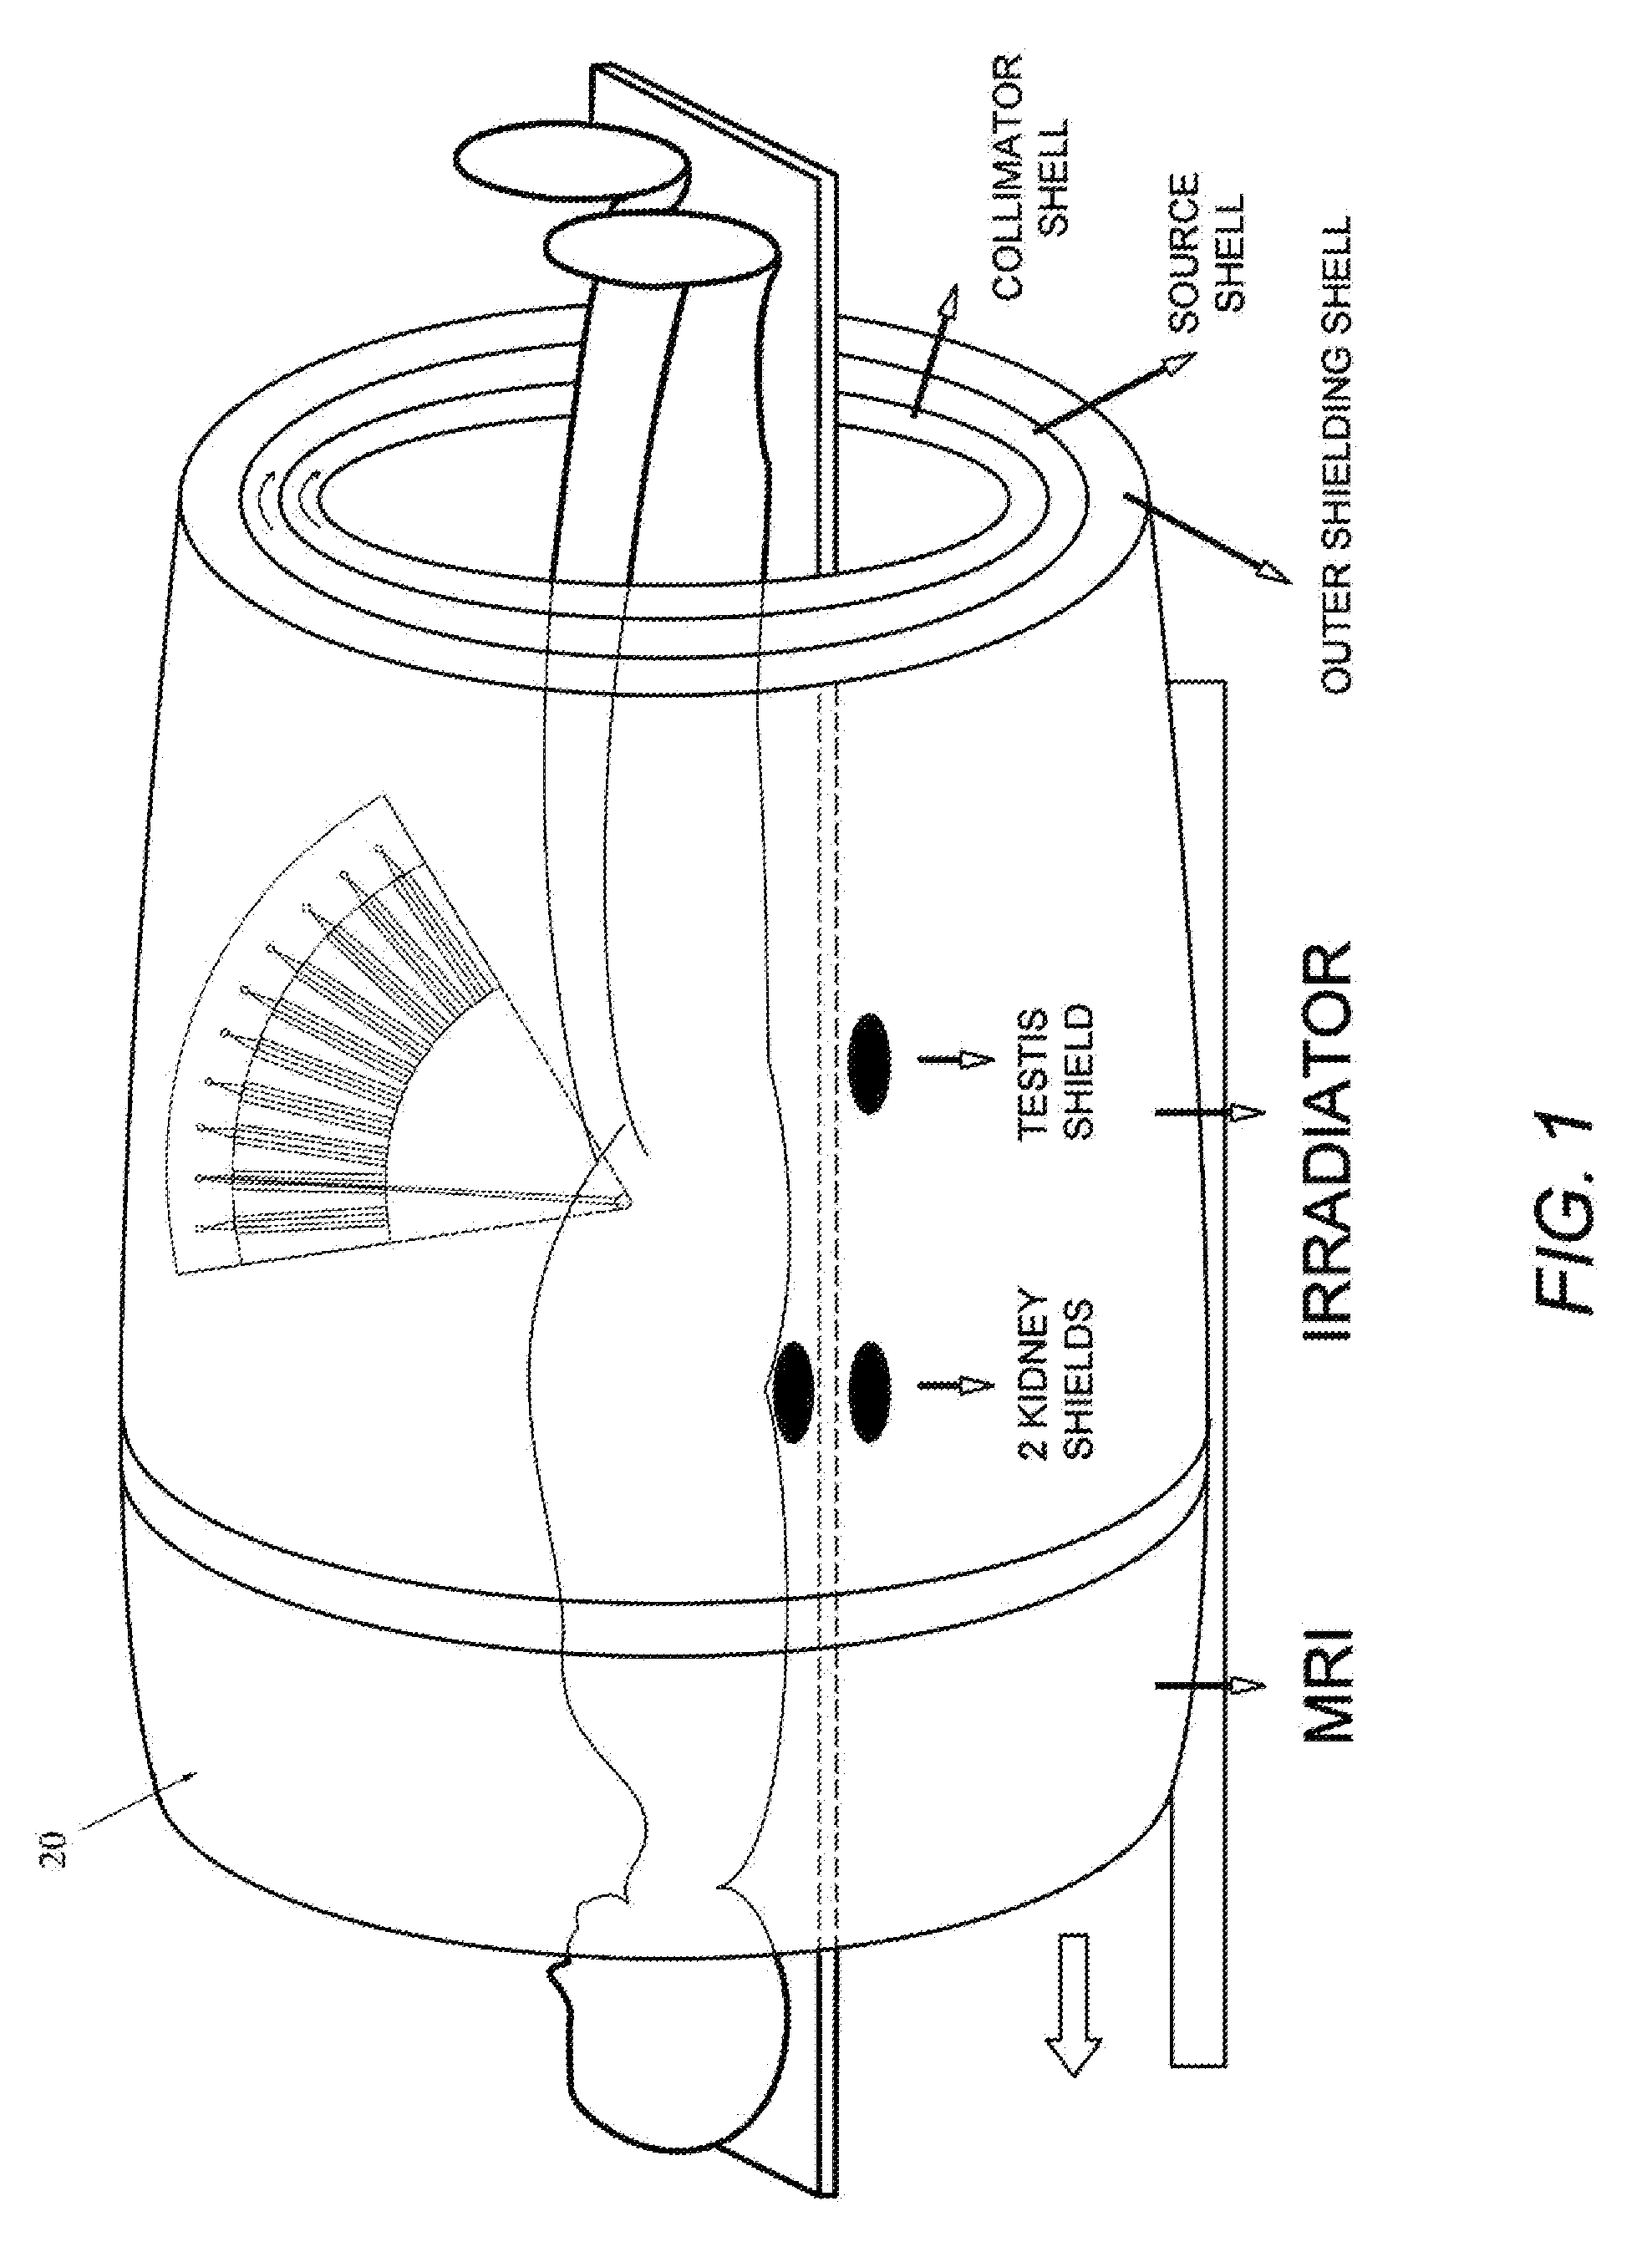 Method and device for image guided dynamic radiation treatment of prostate cancer and other pelvic lesions